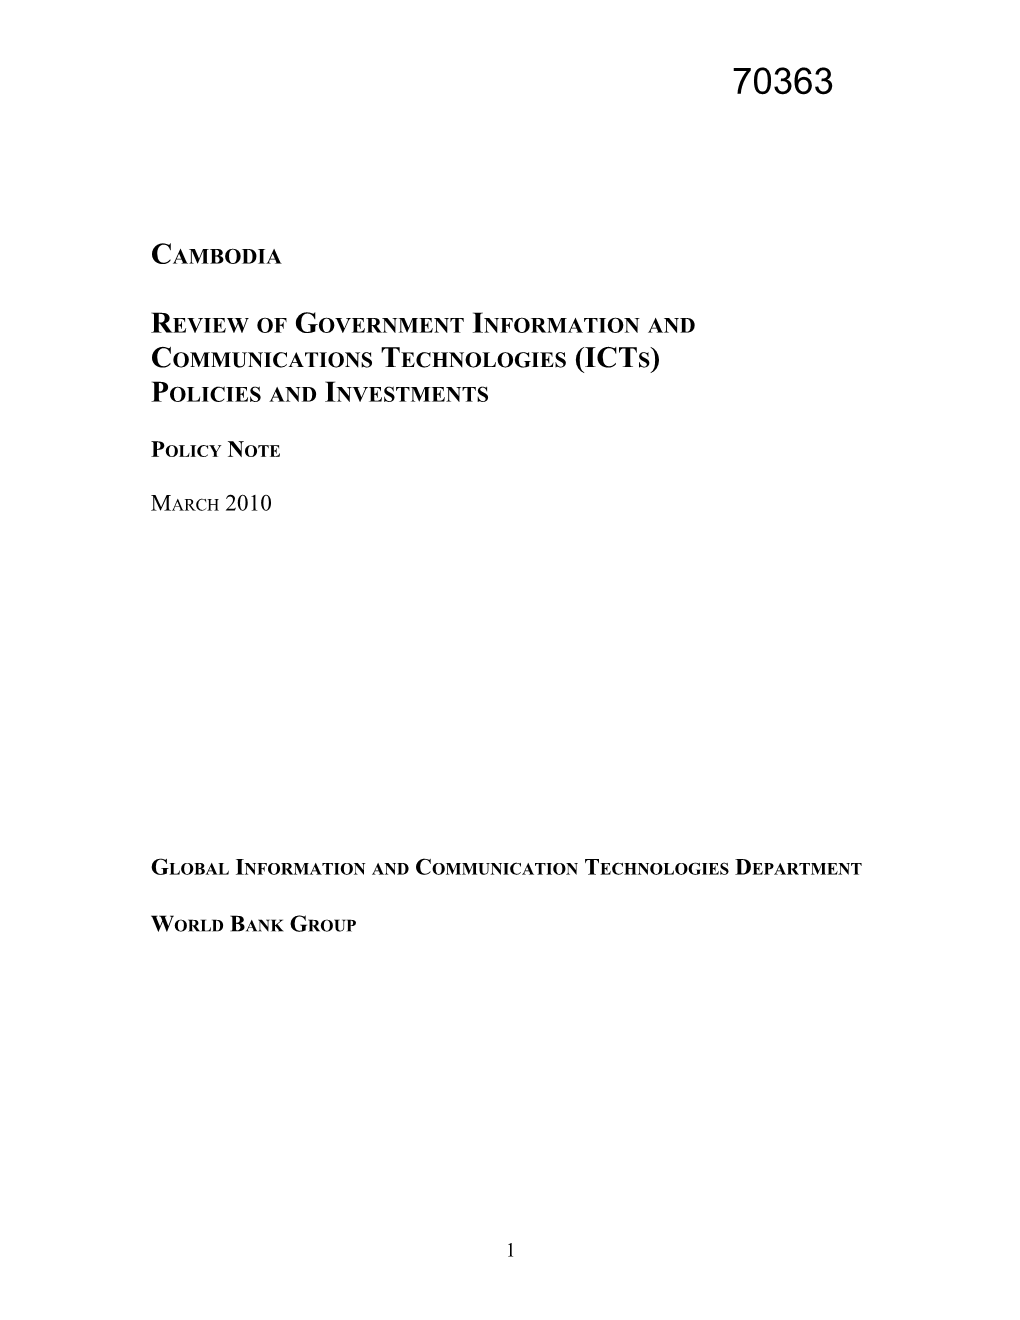 Review of Government Information and Communications Technologies (Icts)